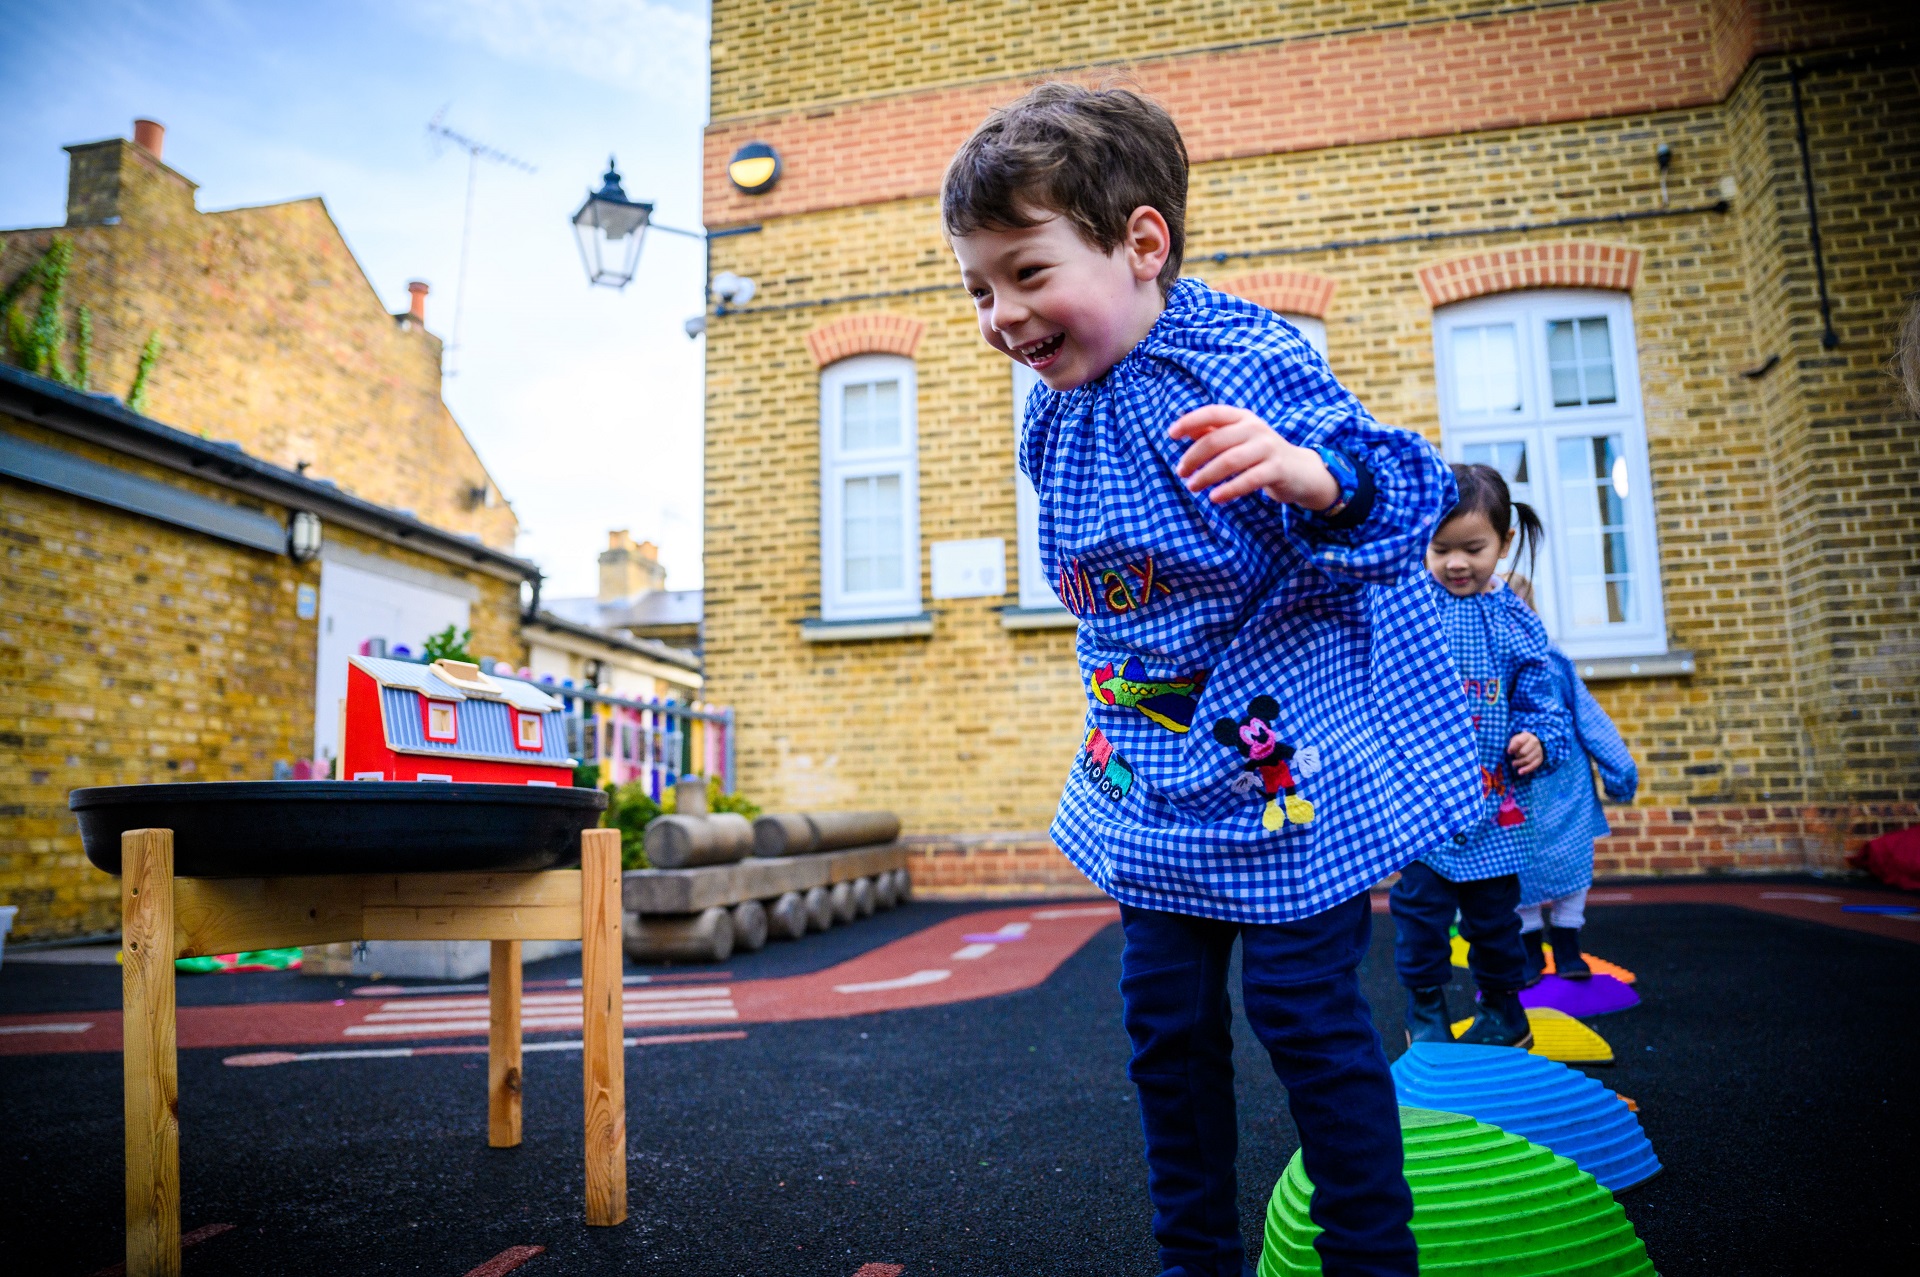 A Nursery pupil runs across the playground, which is full of equipment.